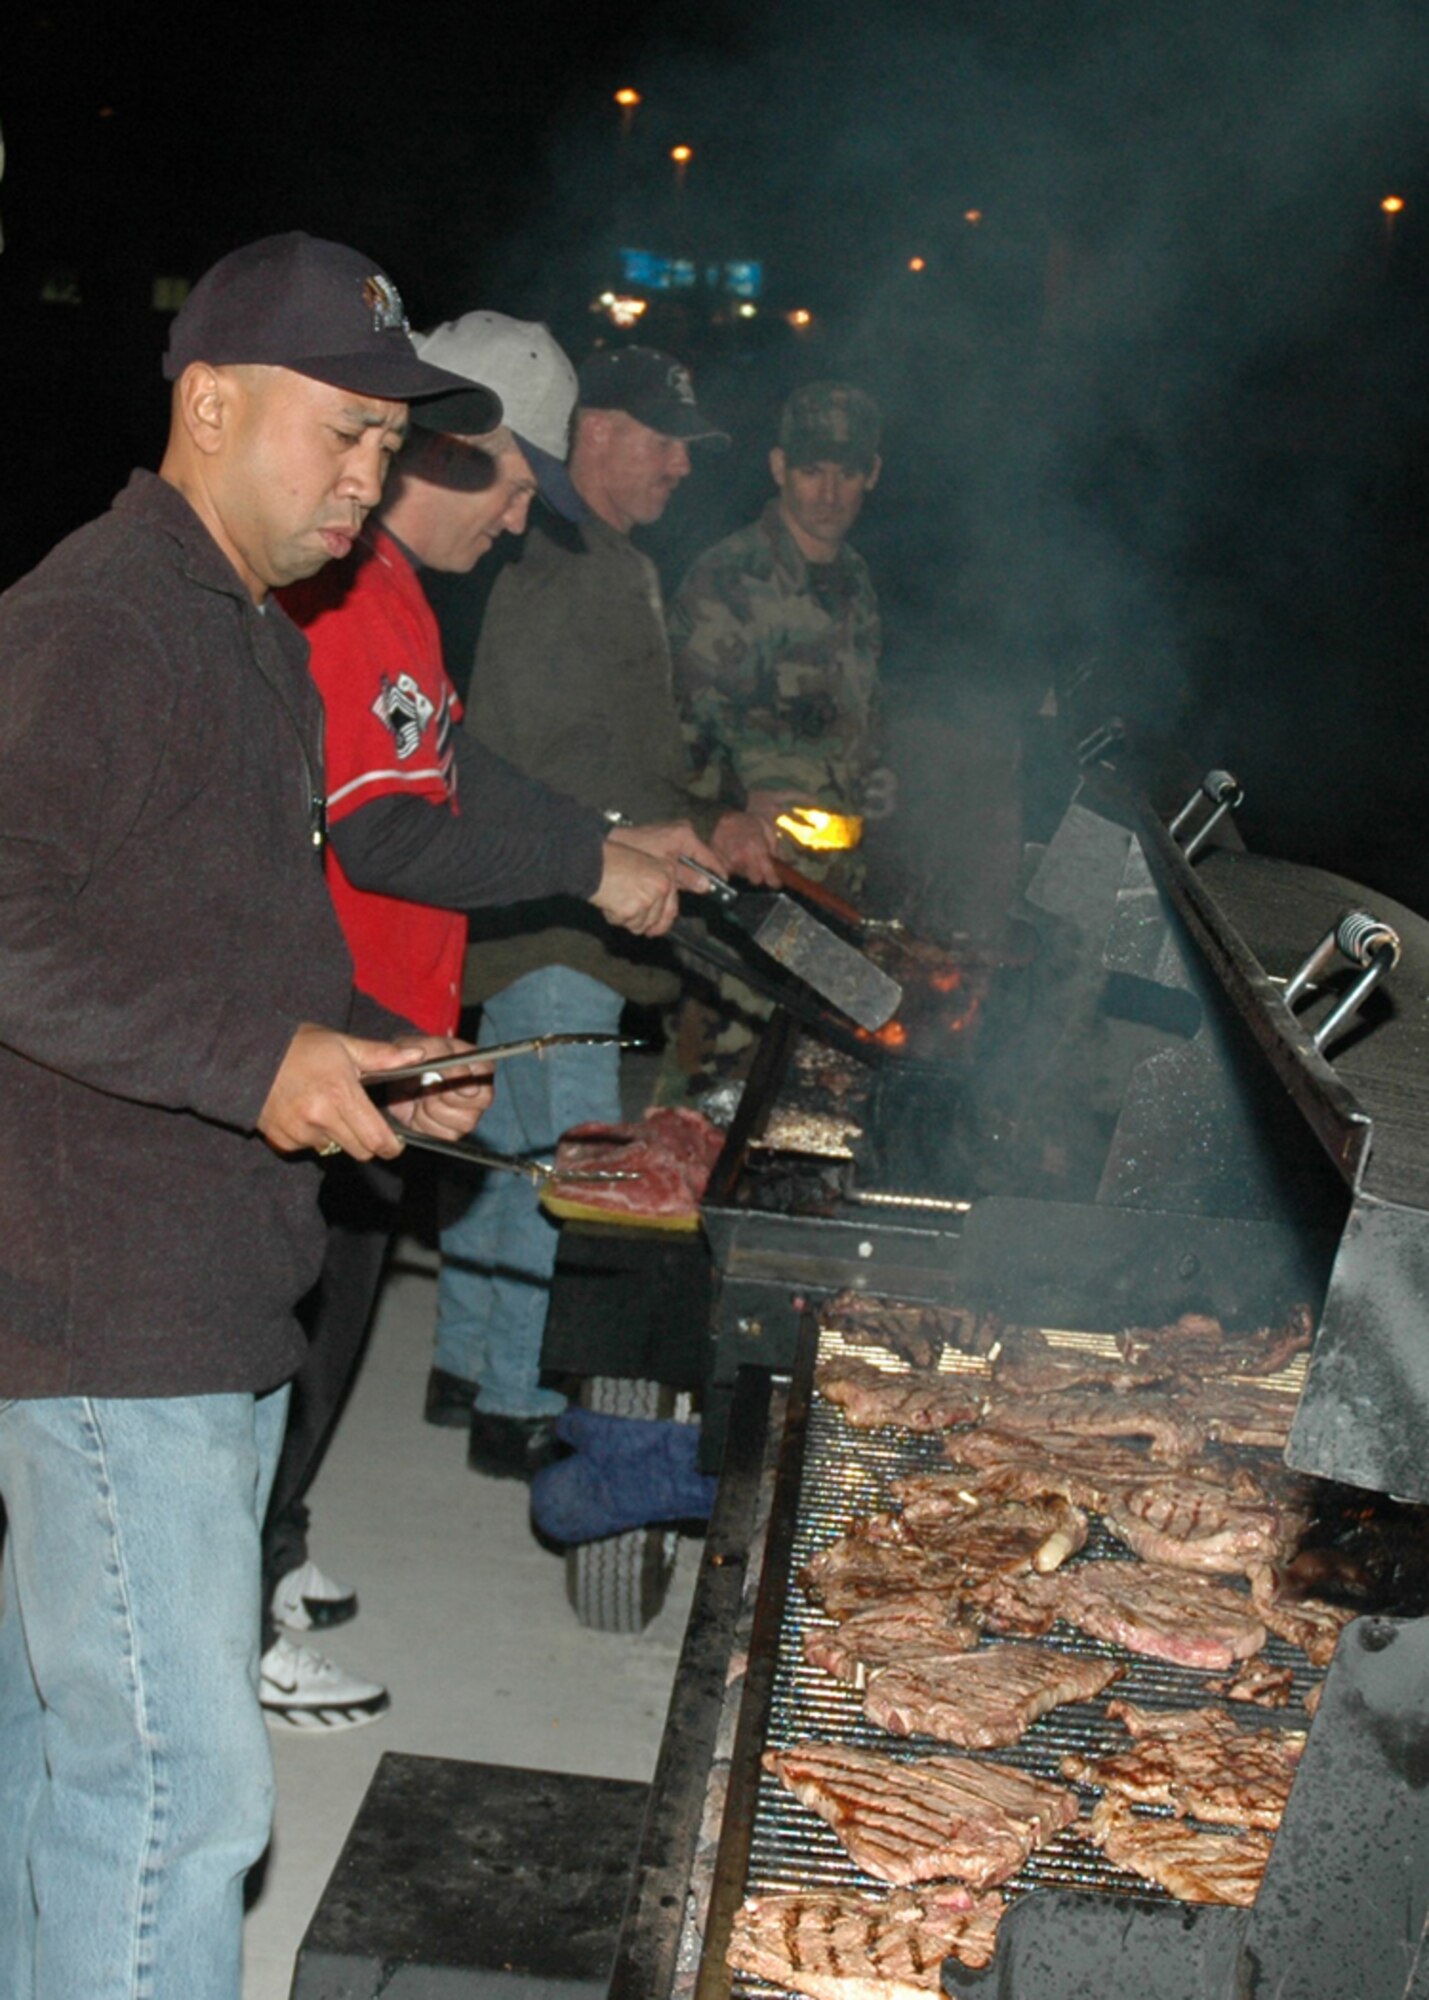 OSAN AIR BASE, Republic of Korea --  The Osan 5/6 Club hosted the first Team Osan 'Enlisted Only' Combat Dining-In Nov. 30 at the traffic management office warehouse in Bldg 635. Approximately 12 people were responsible for preparing, cooking and serving more than 600 pieces of steak and chicken. (U.S. Air Force photo by Tech. Sgt. Michael O'Connor)